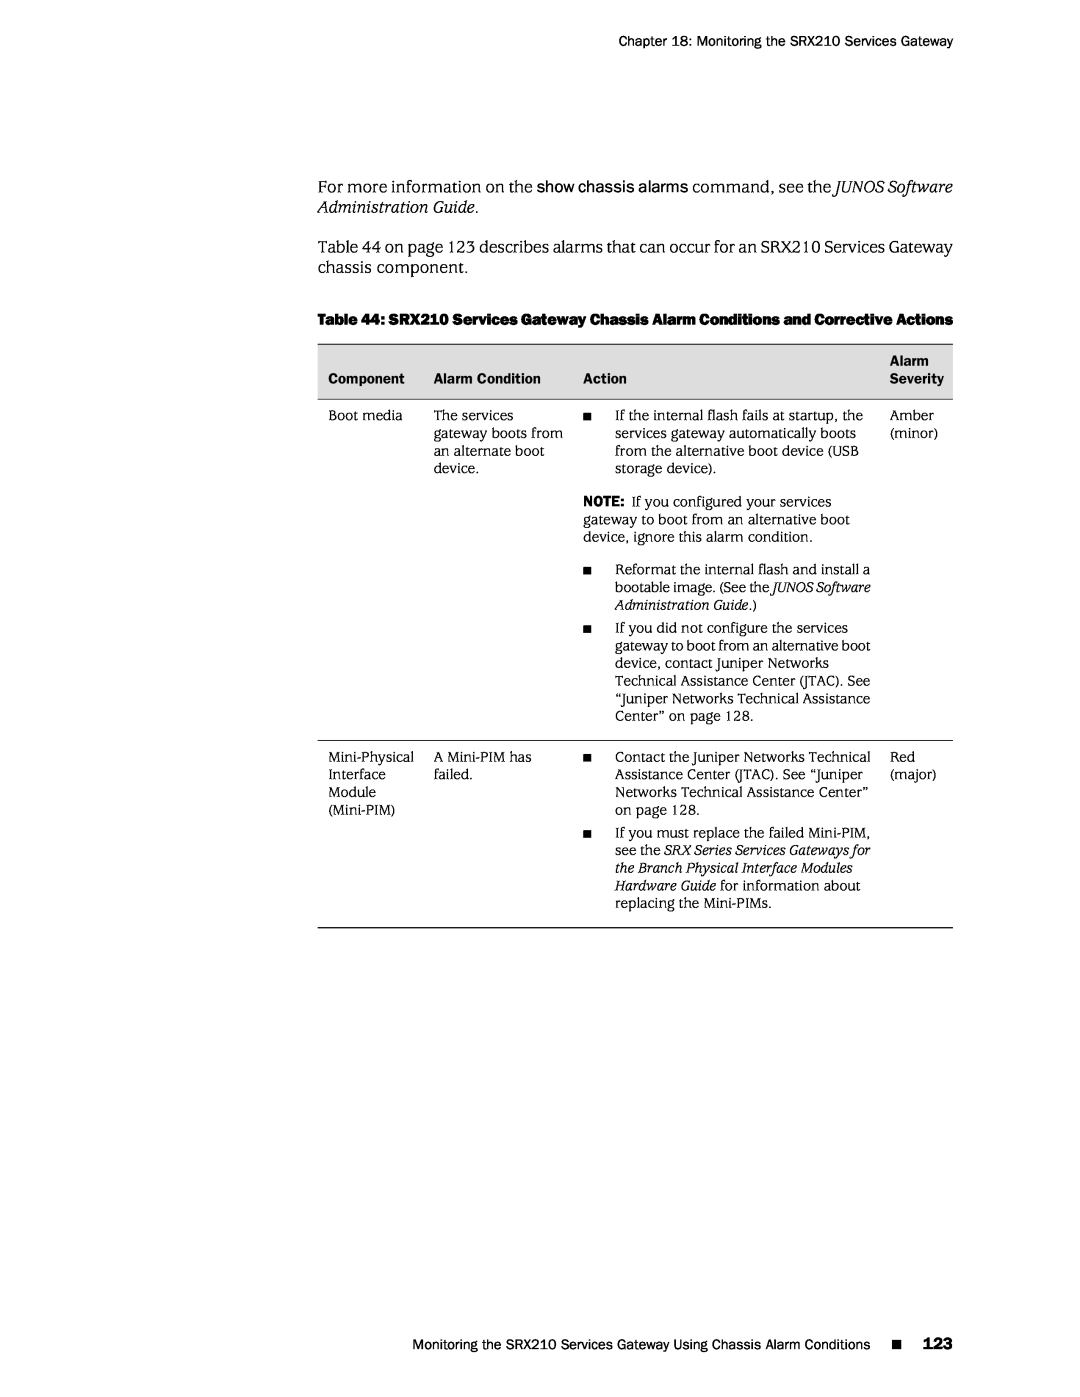 Juniper Networks SRX 210 manual Administration Guide, the Branch Physical Interface Modules 